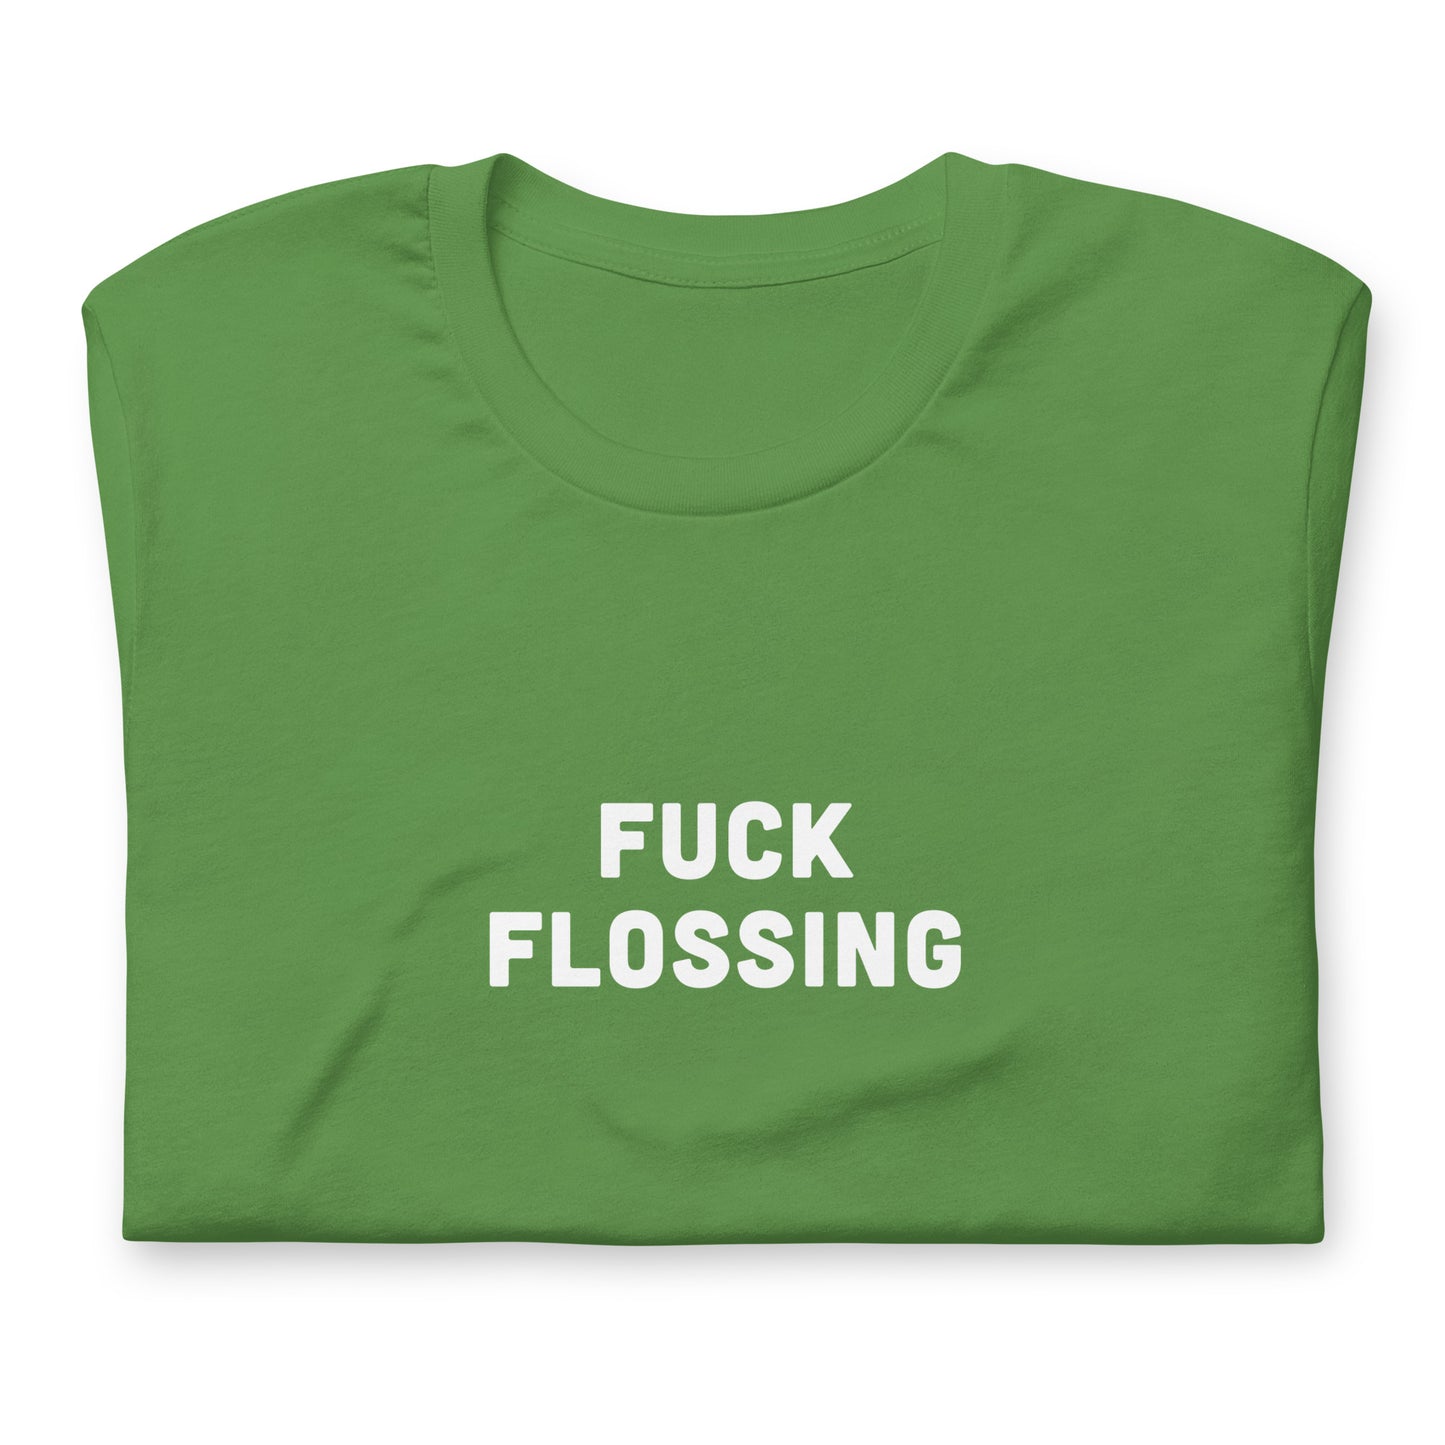 Fuck Flossing T-Shirt Size 2XL Color Navy